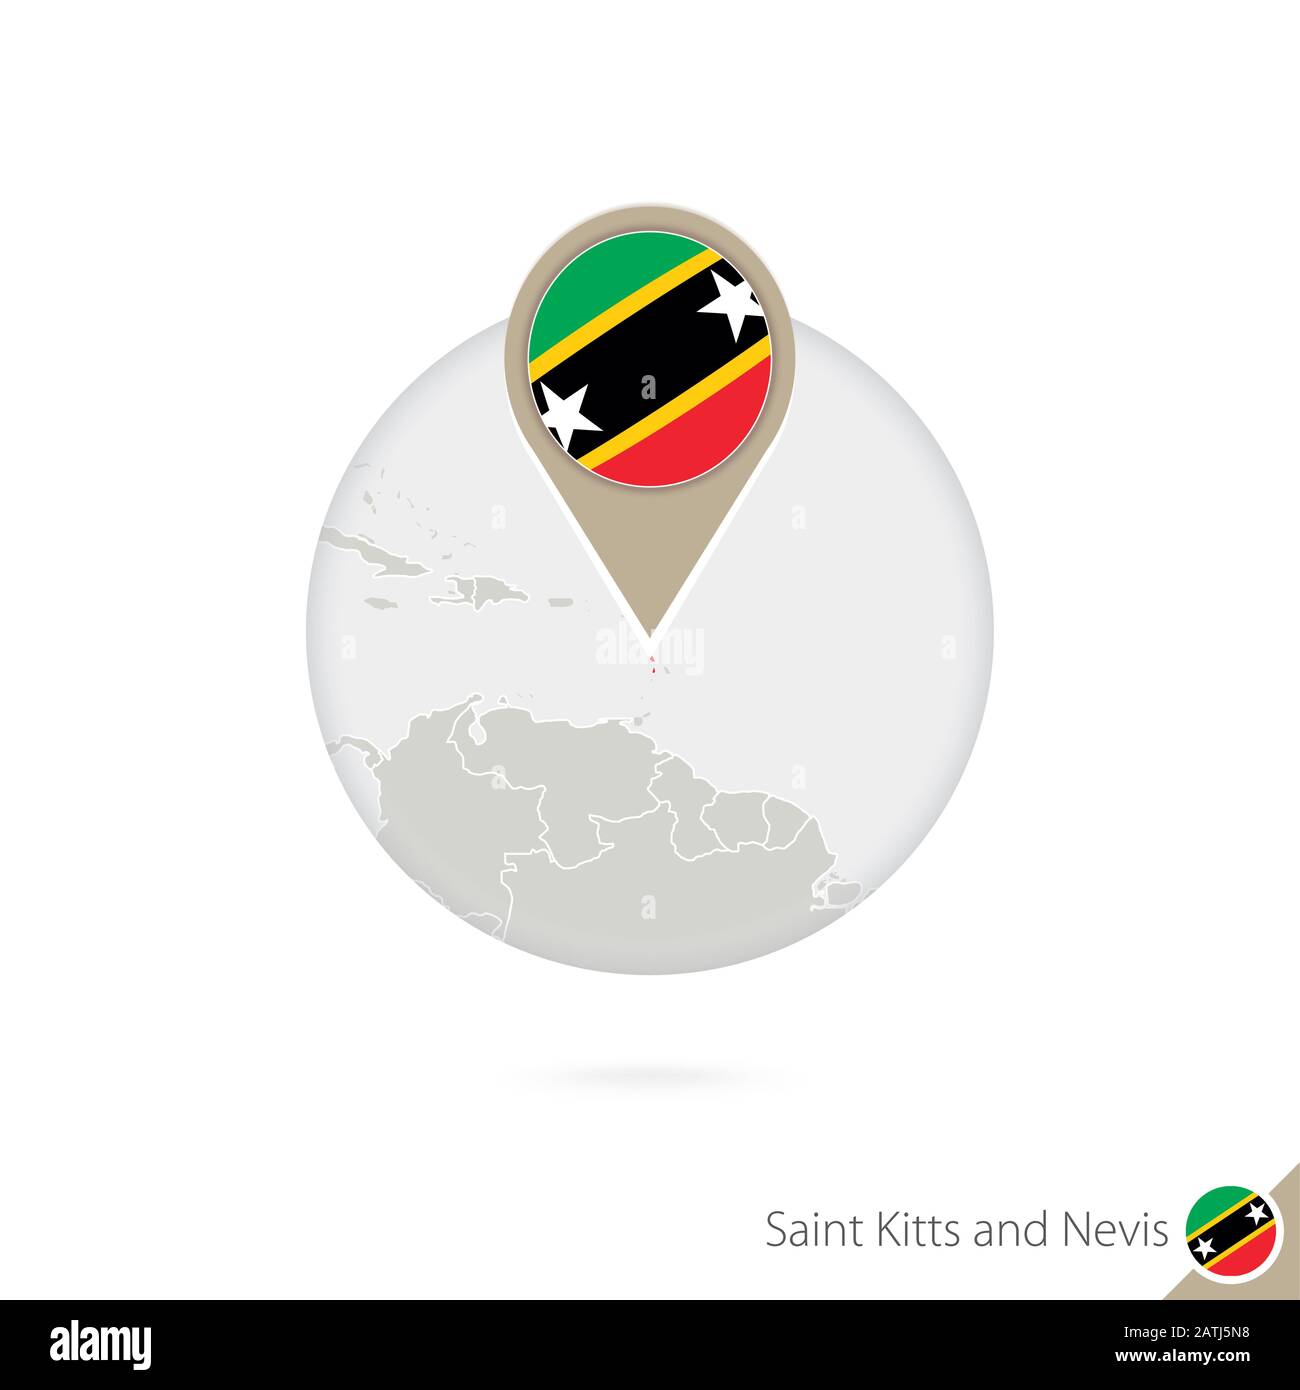 Saint Kitts and Nevis map and flag in circle. Map of Saint Kitts and Nevis, Saint Kitts and Nevis flag pin. Map of Saint Kitts and Nevis in the style Stock Vector